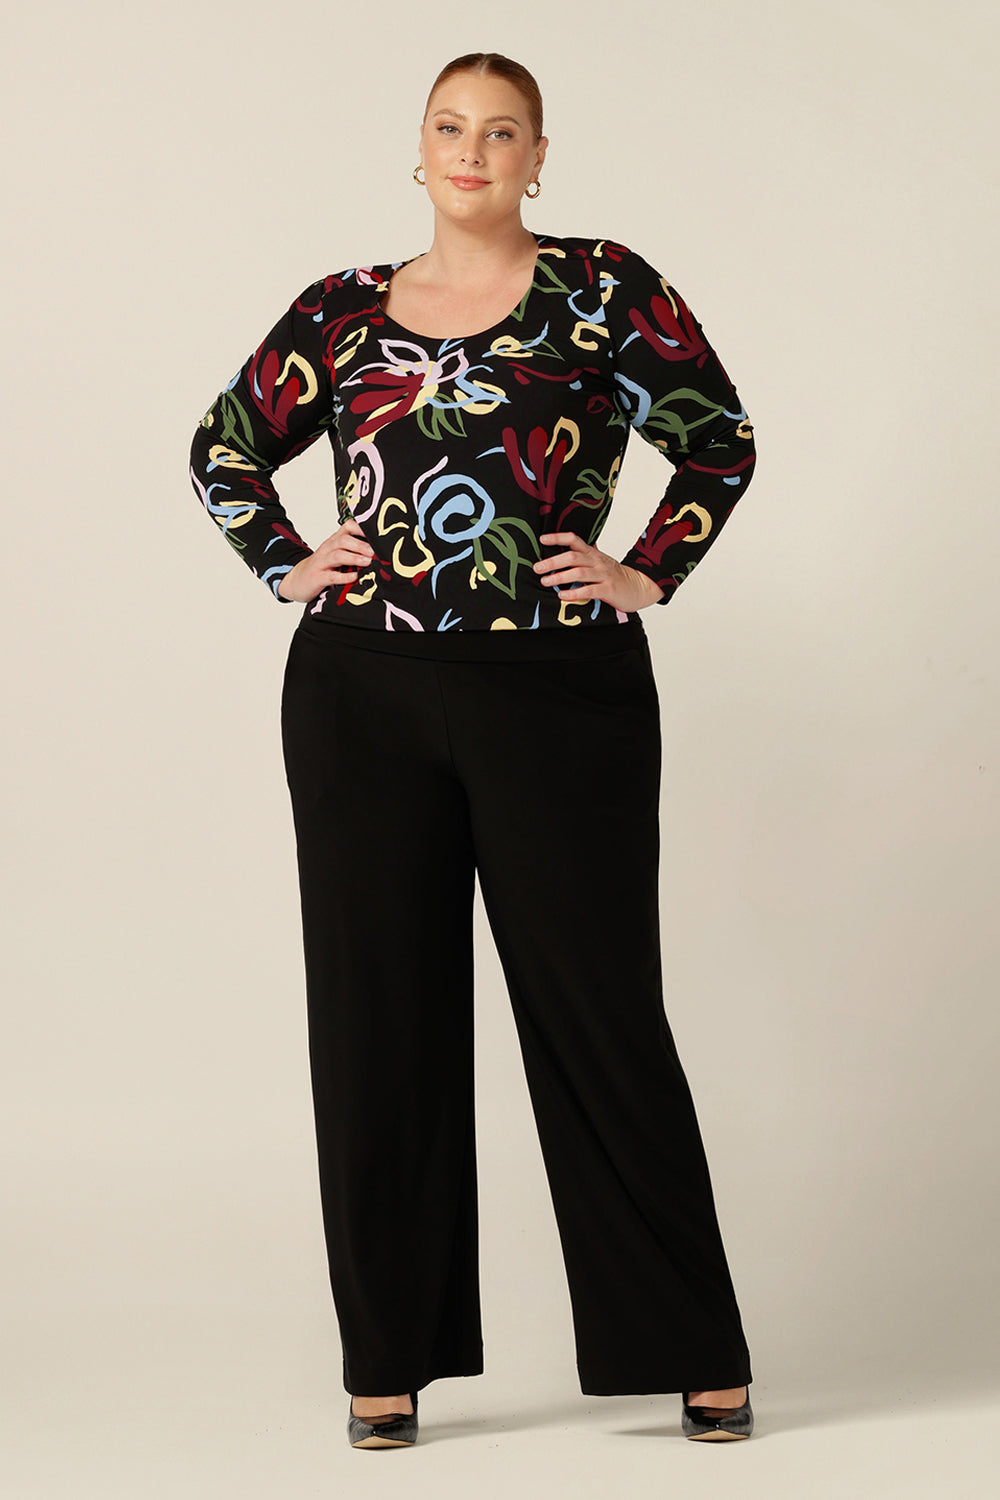 a round neck, long sleeve jersey top for plus size and fuller figure women, this workwear top features an abstract print with black base. Styled for the office, this comfortable top is worn with black straight-cut, wide leg, black pants.